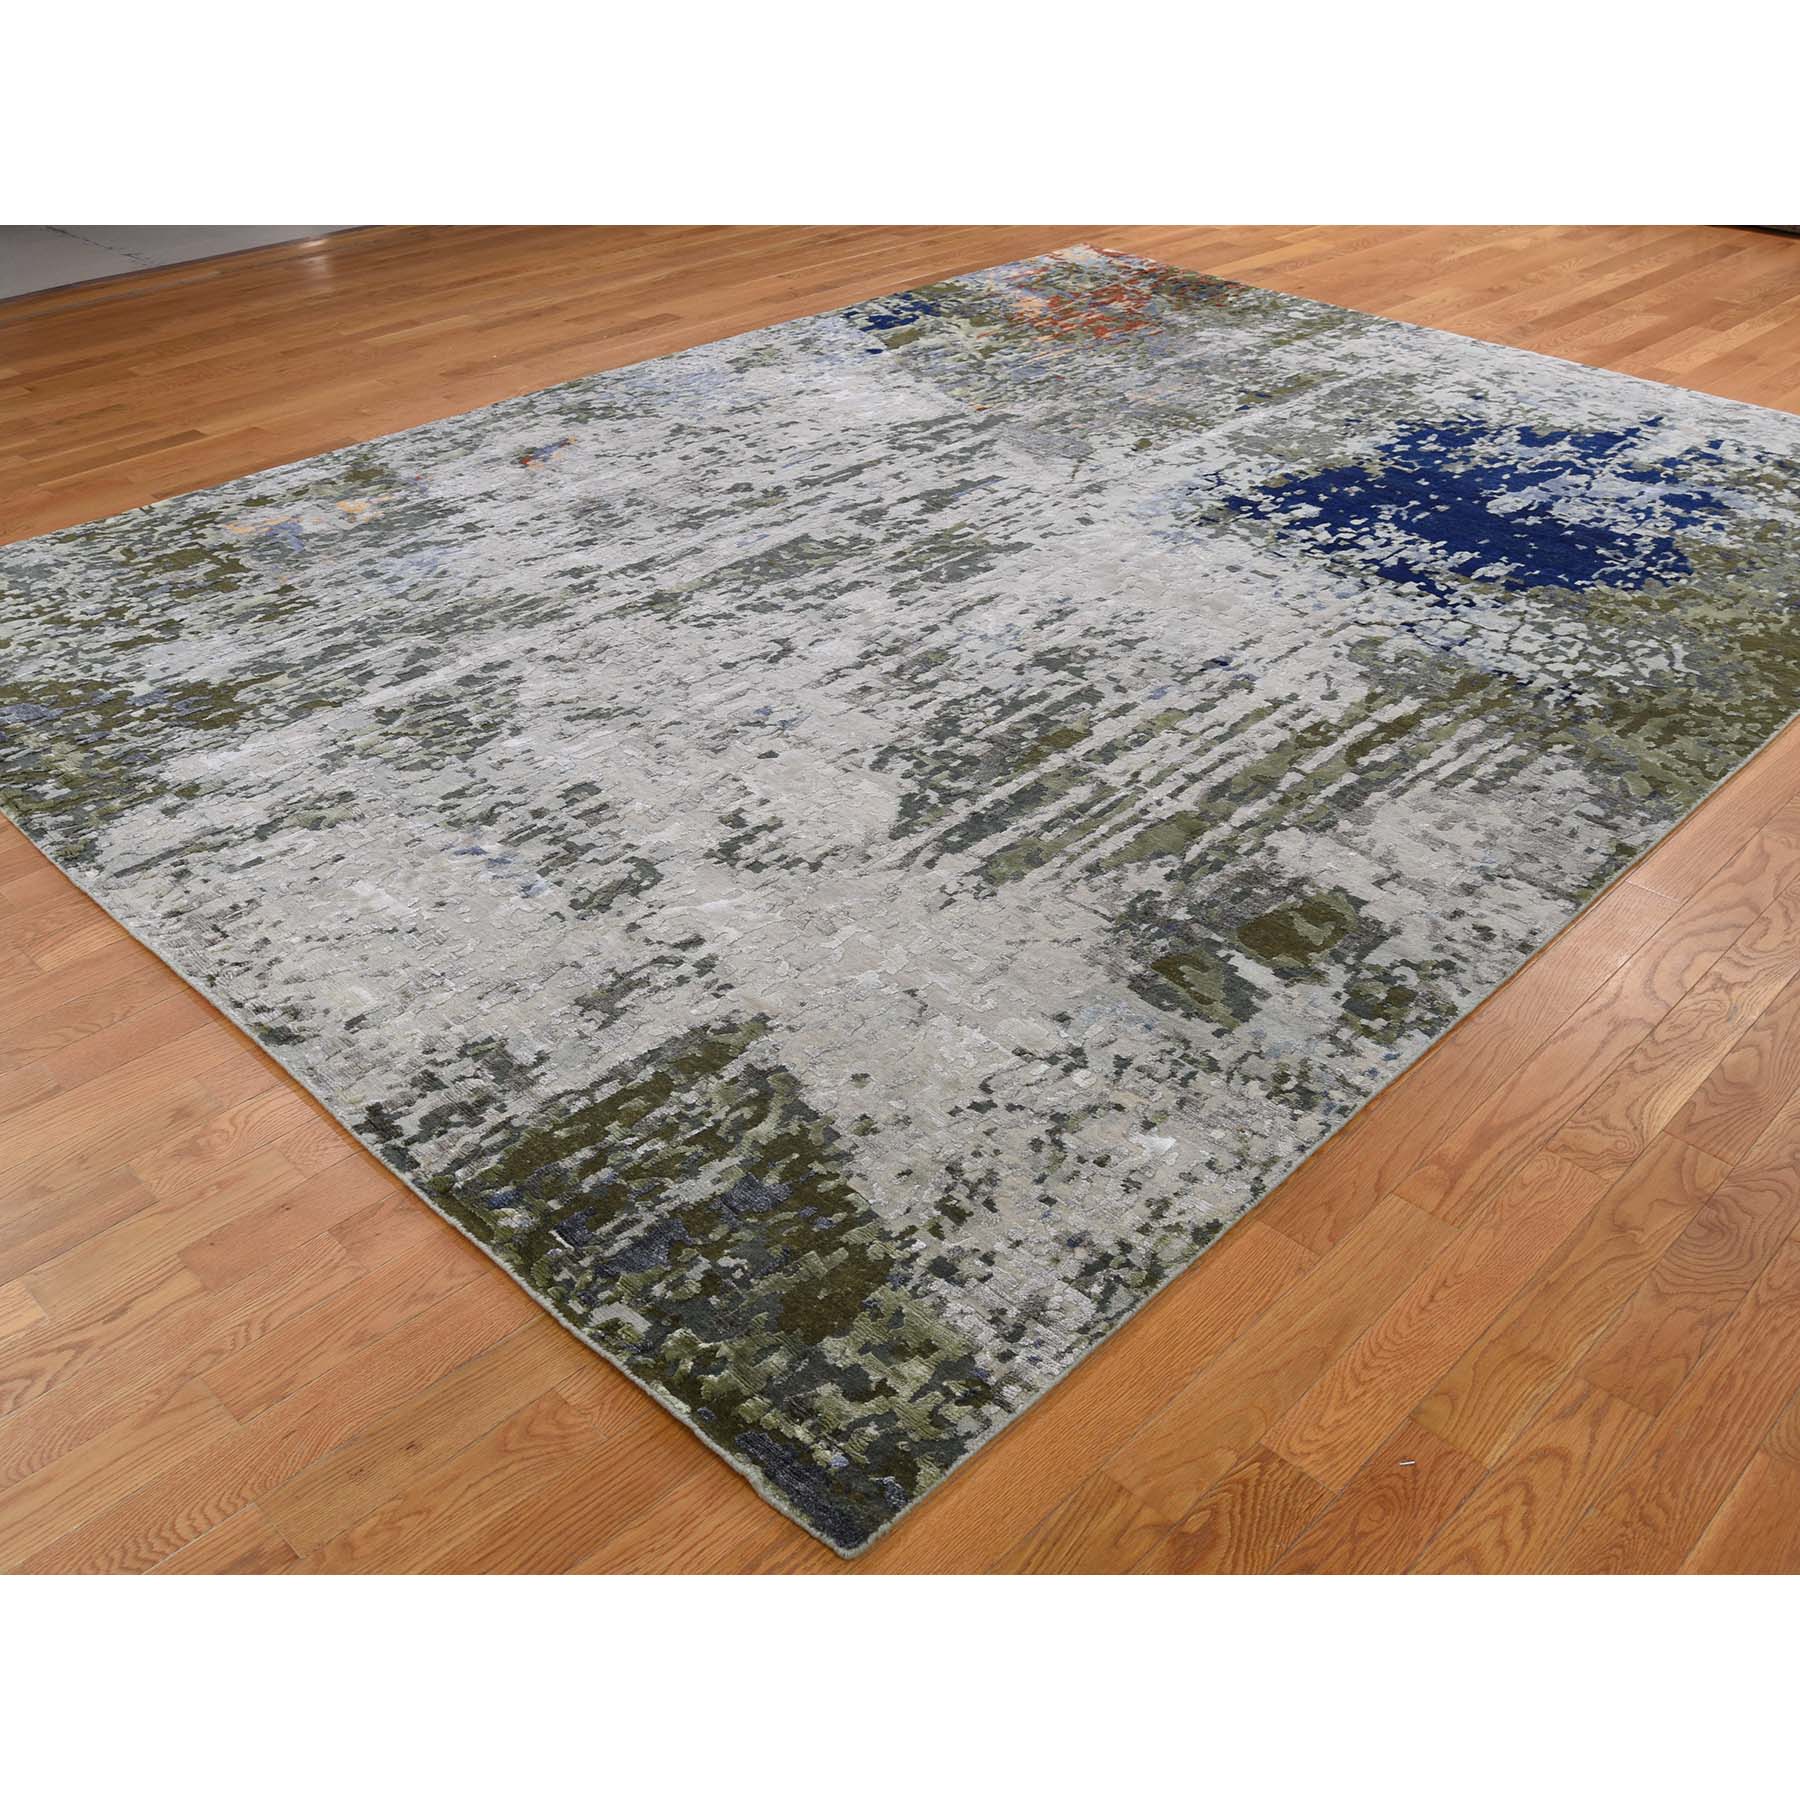 9-x11-9  Hi-Low Pile Modern Abstract Design Wool and Silk Hand Knotted Rug 